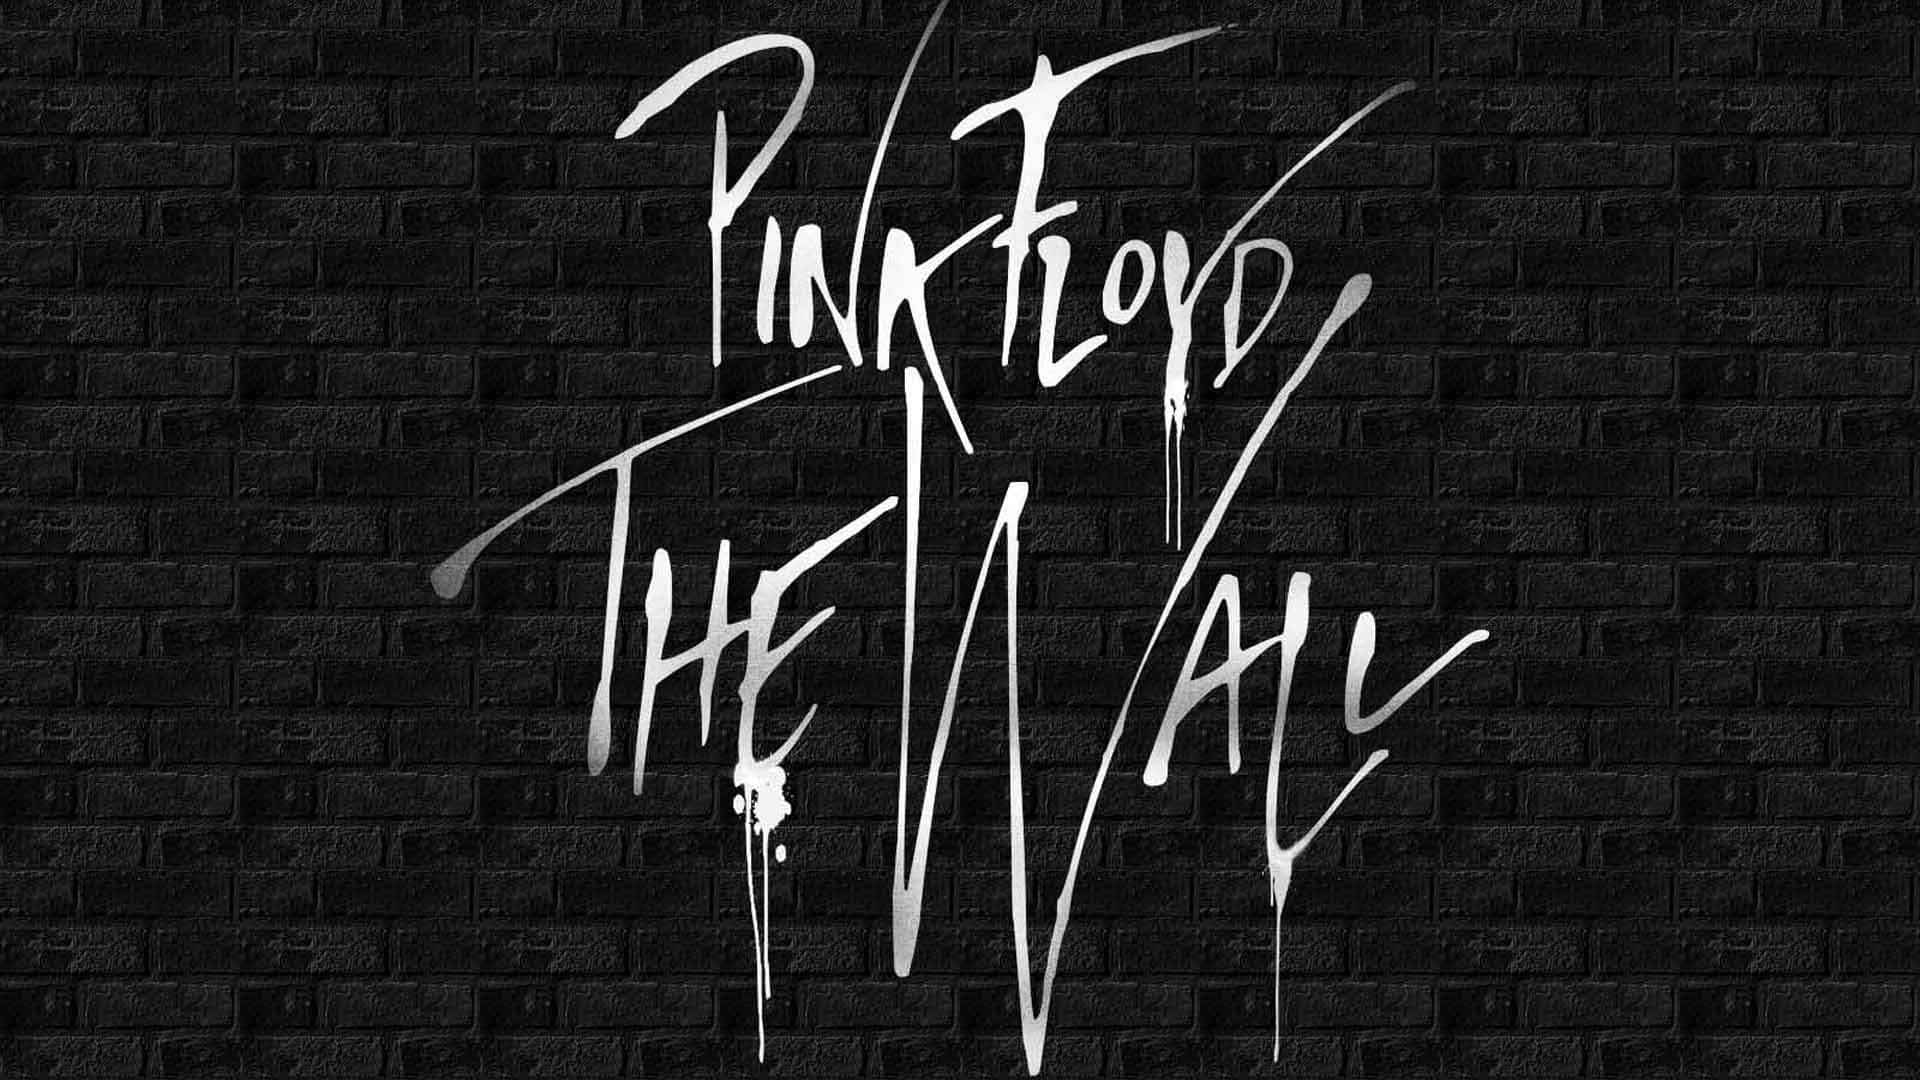 Pink Floyd The Wall - Classic Rock Album Cover Wallpaper